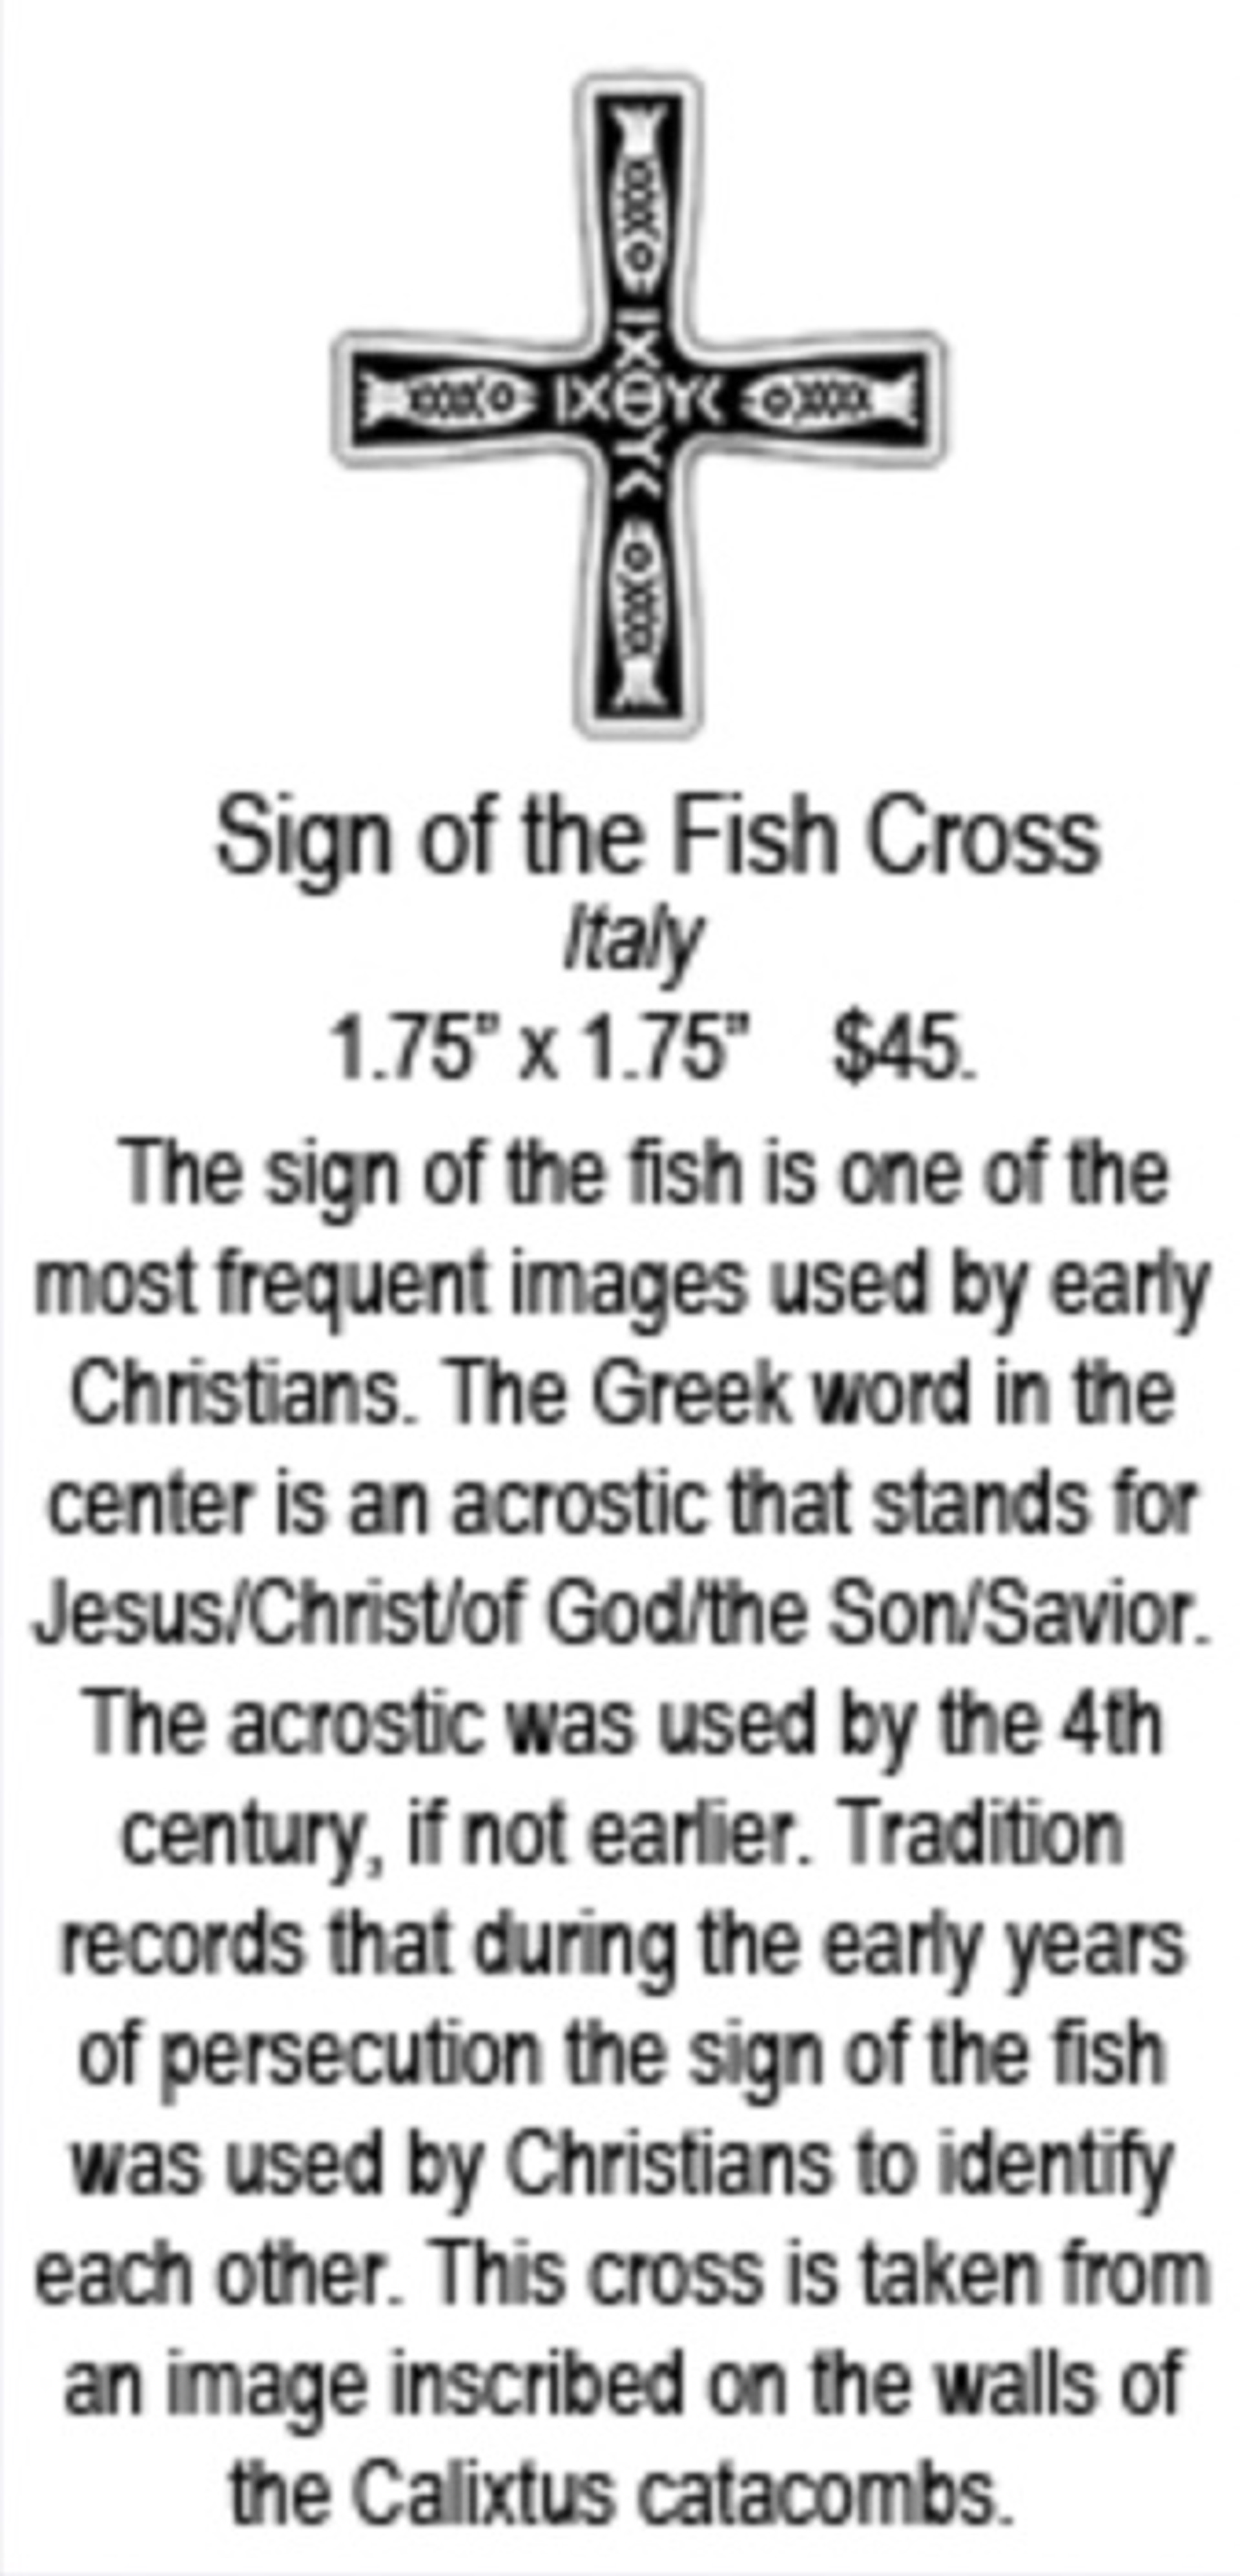 Cross - Sign of the Fish 9523 by Deanne McKeown